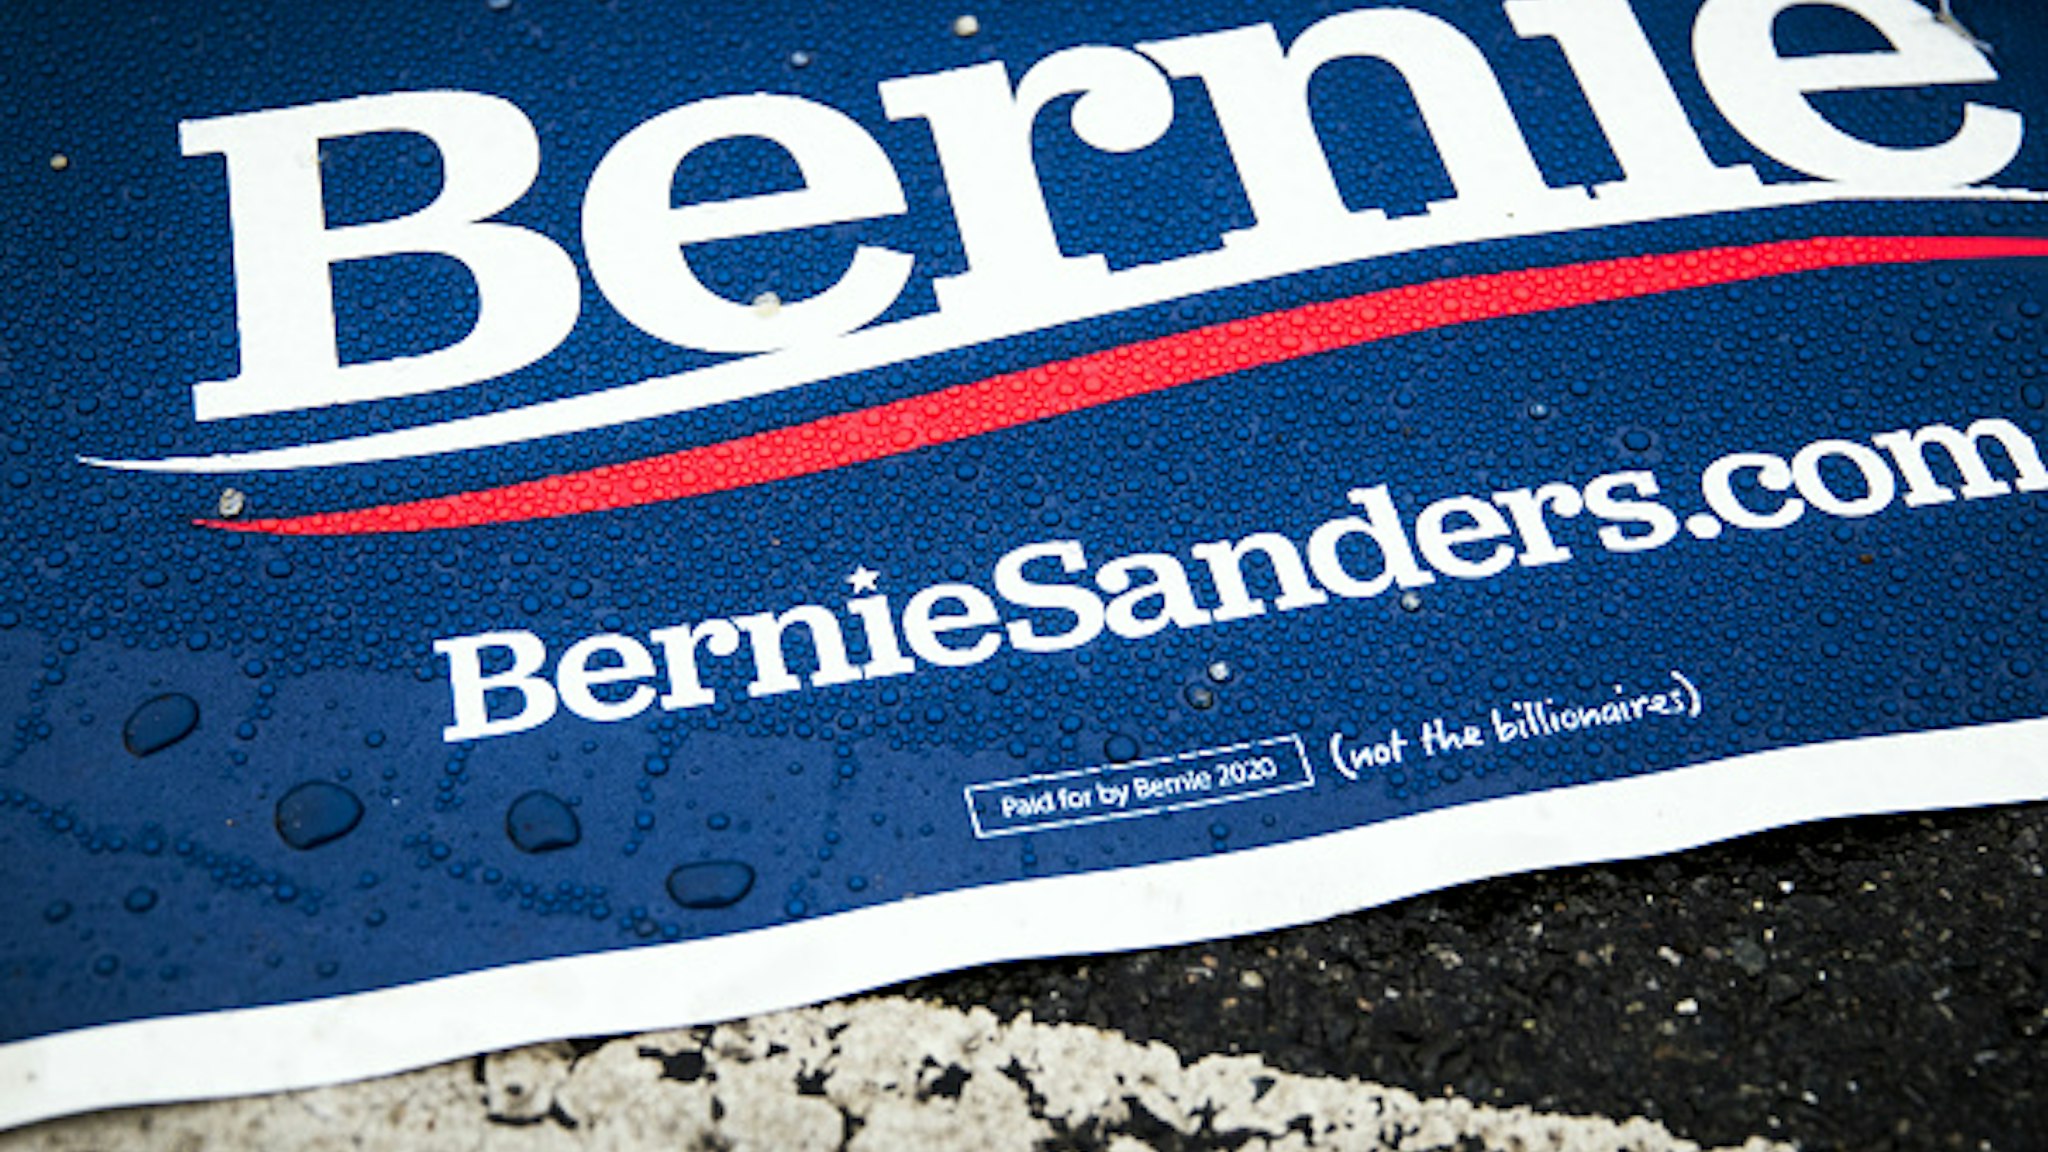 A campaign sign for Senator Bernie Sanders, an Independent from Vermont and 2020 presidential candidate, lays on the ground in Portsmouth, New Hampshire, U.S., on Tuesday, Feb. 11, 2020. Sanders has opened a 10-point lead over Joe Biden in the Democratic presidential primary, according to a national poll released Tuesday, highlighting how the former vice president's fourth-place showing in Iowa has reshaped the nomination fight.